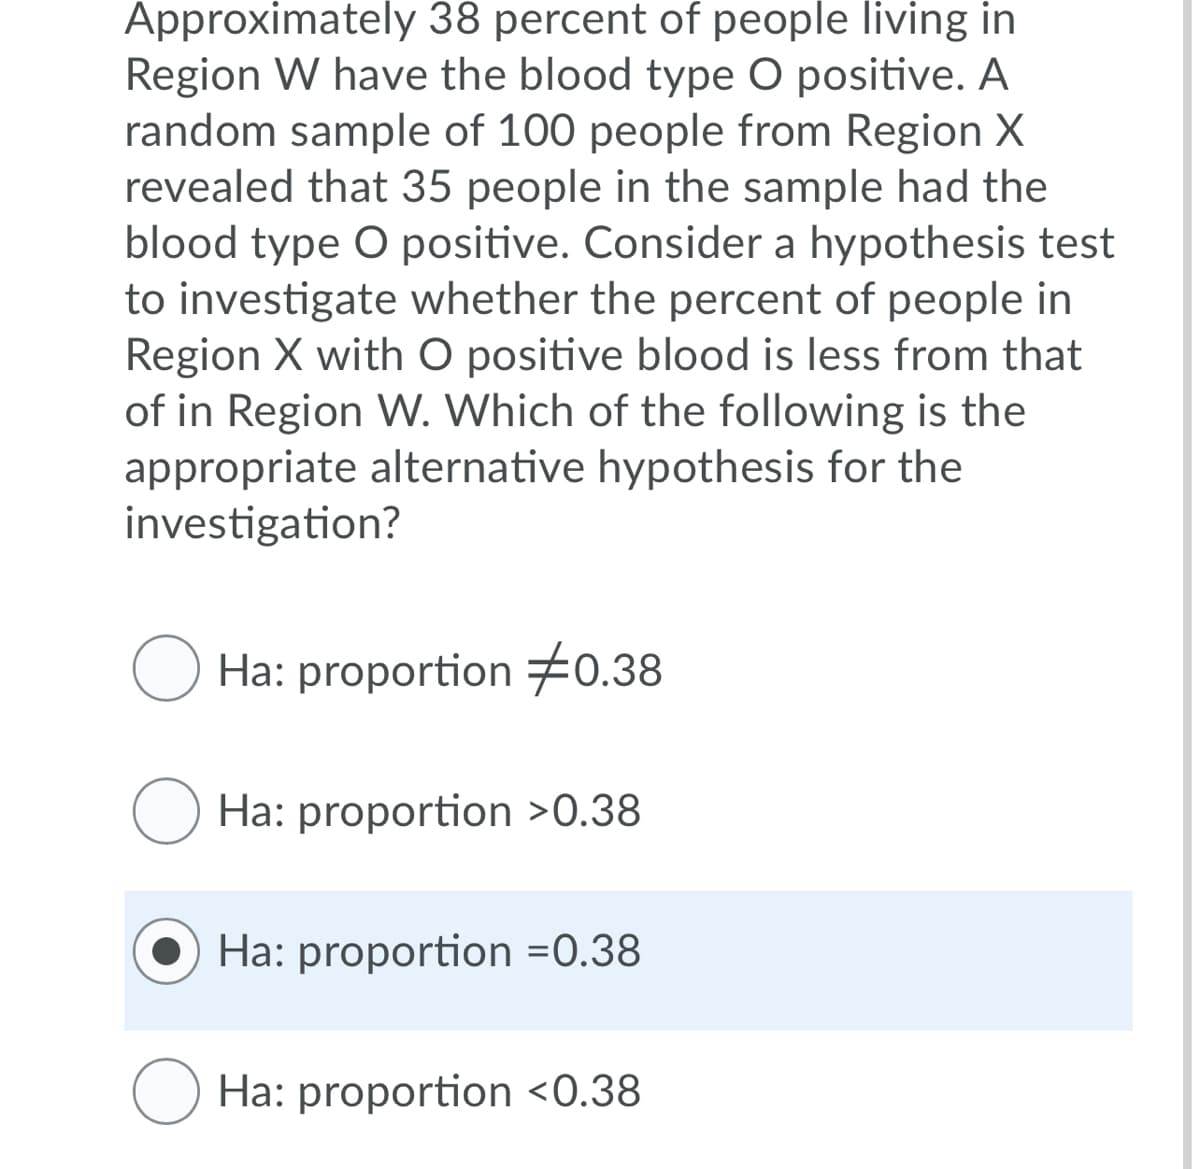 Approximately 38 percent of people living in
Region W have the blood type O positive. A
random sample of 100 people from Region X
revealed that 35 people in the sample had the
blood type O positive. Consider a hypothesis test
to investigate whether the percent of people in
Region X with O positive blood is less from that
of in Region W. Which of the following is the
appropriate alternative hypothesis for the
investigation?
Ha: proportion 0.38
Ha: proportion >0.38
Ha: proportion =0.38
O Ha: proportion <0.38
